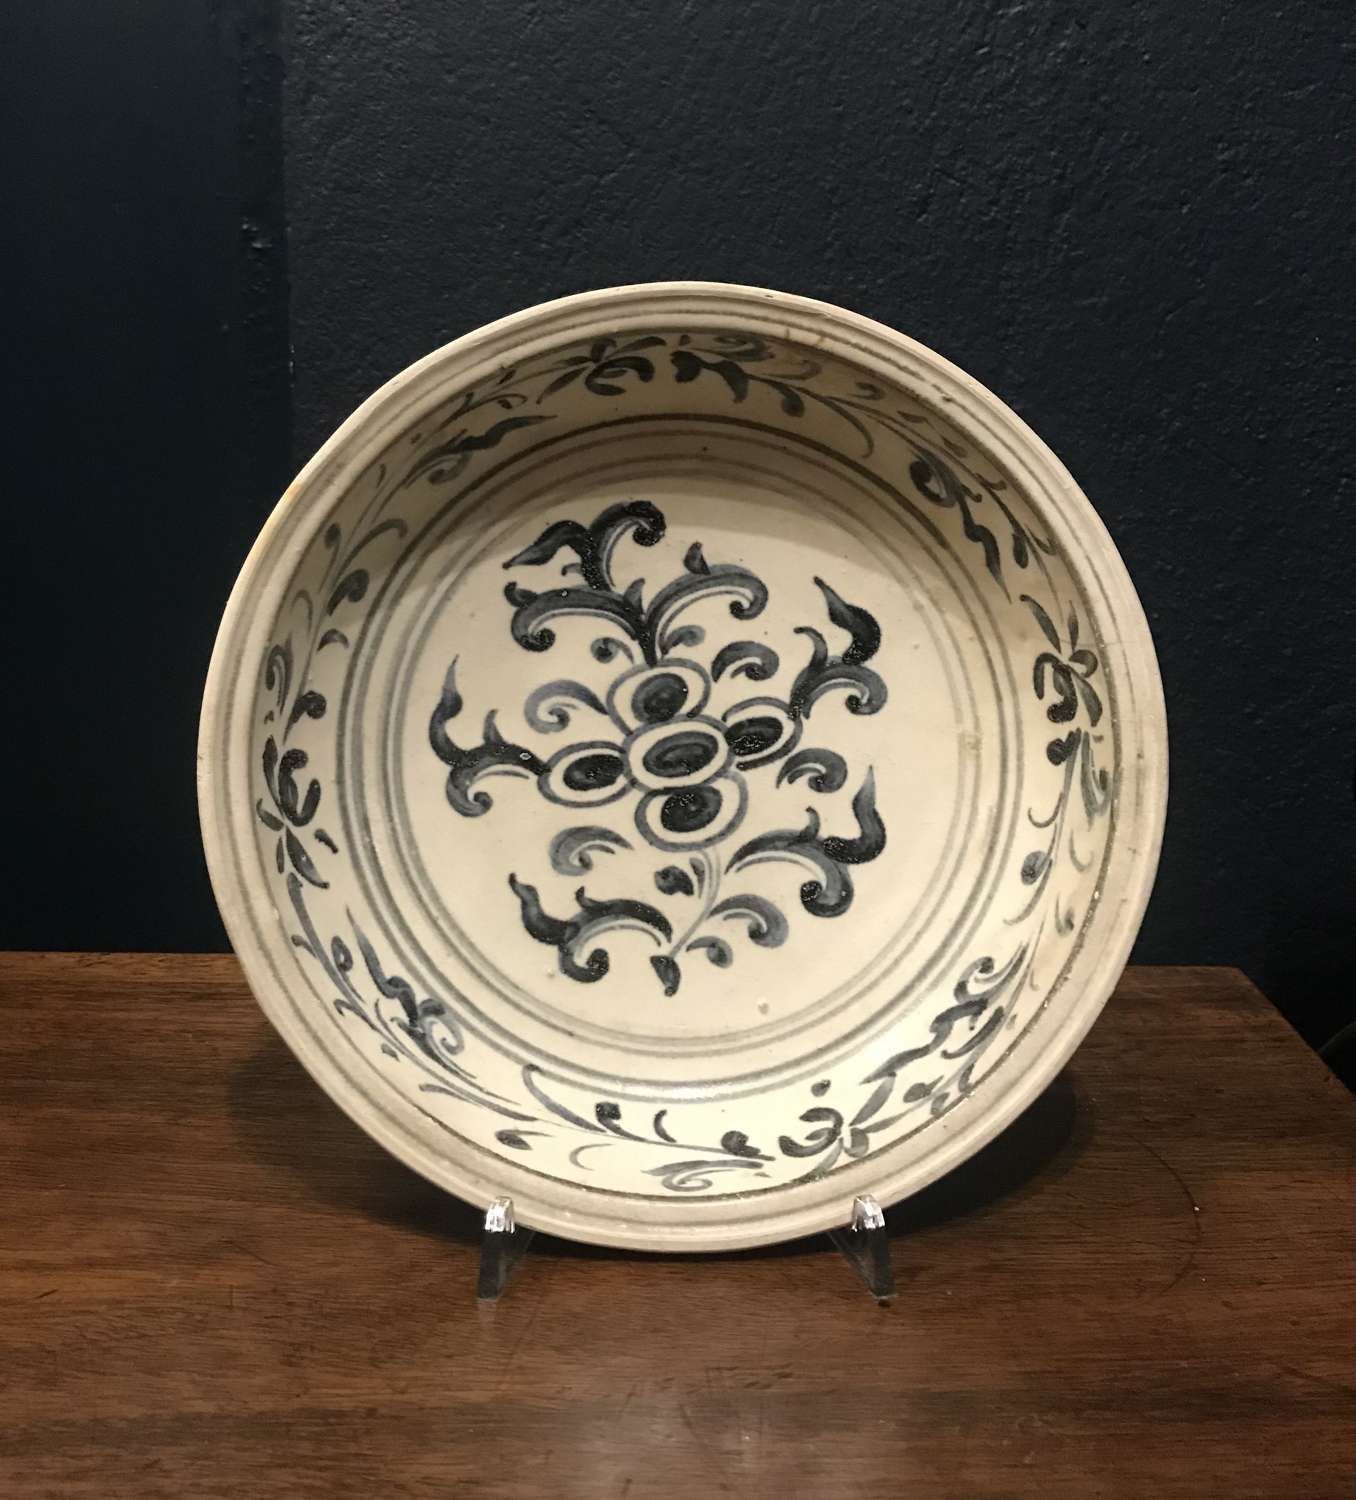 15th c. Hoi An Hoard - Blue and White Charger dish